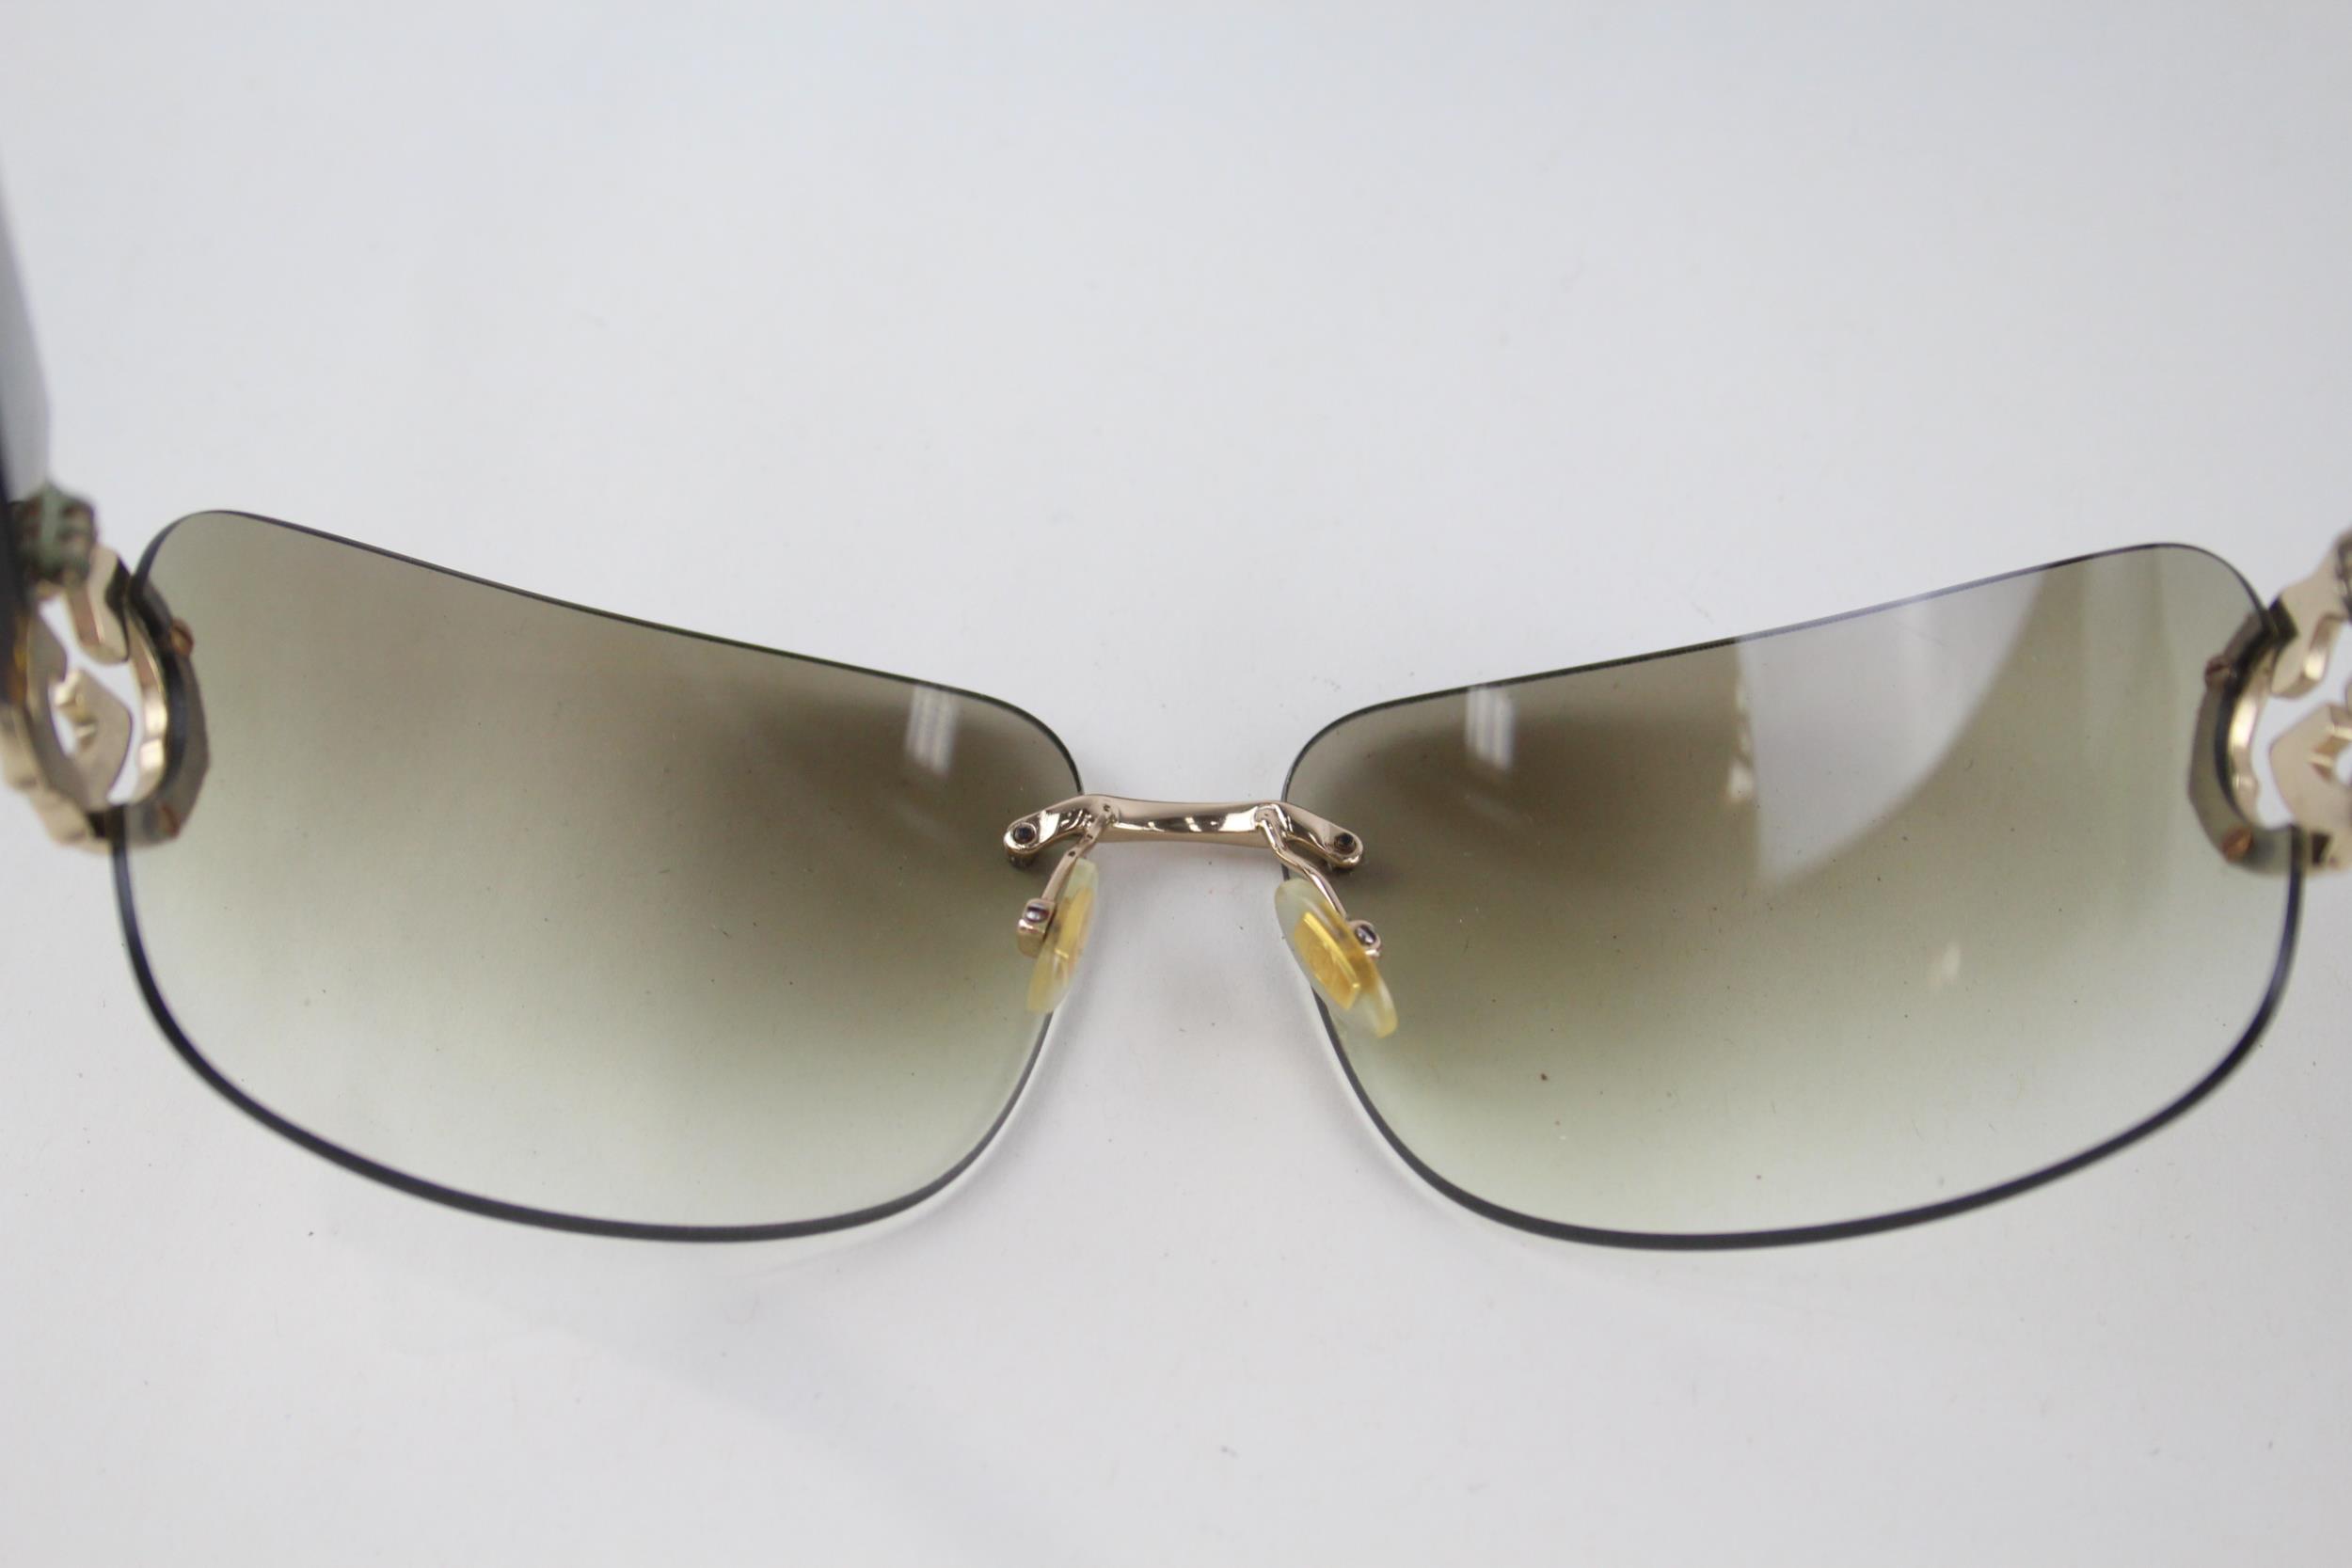 Designer Gucci Sunglasses In Case - Items are in previously owned condition Signs of age & wear - Image 6 of 8